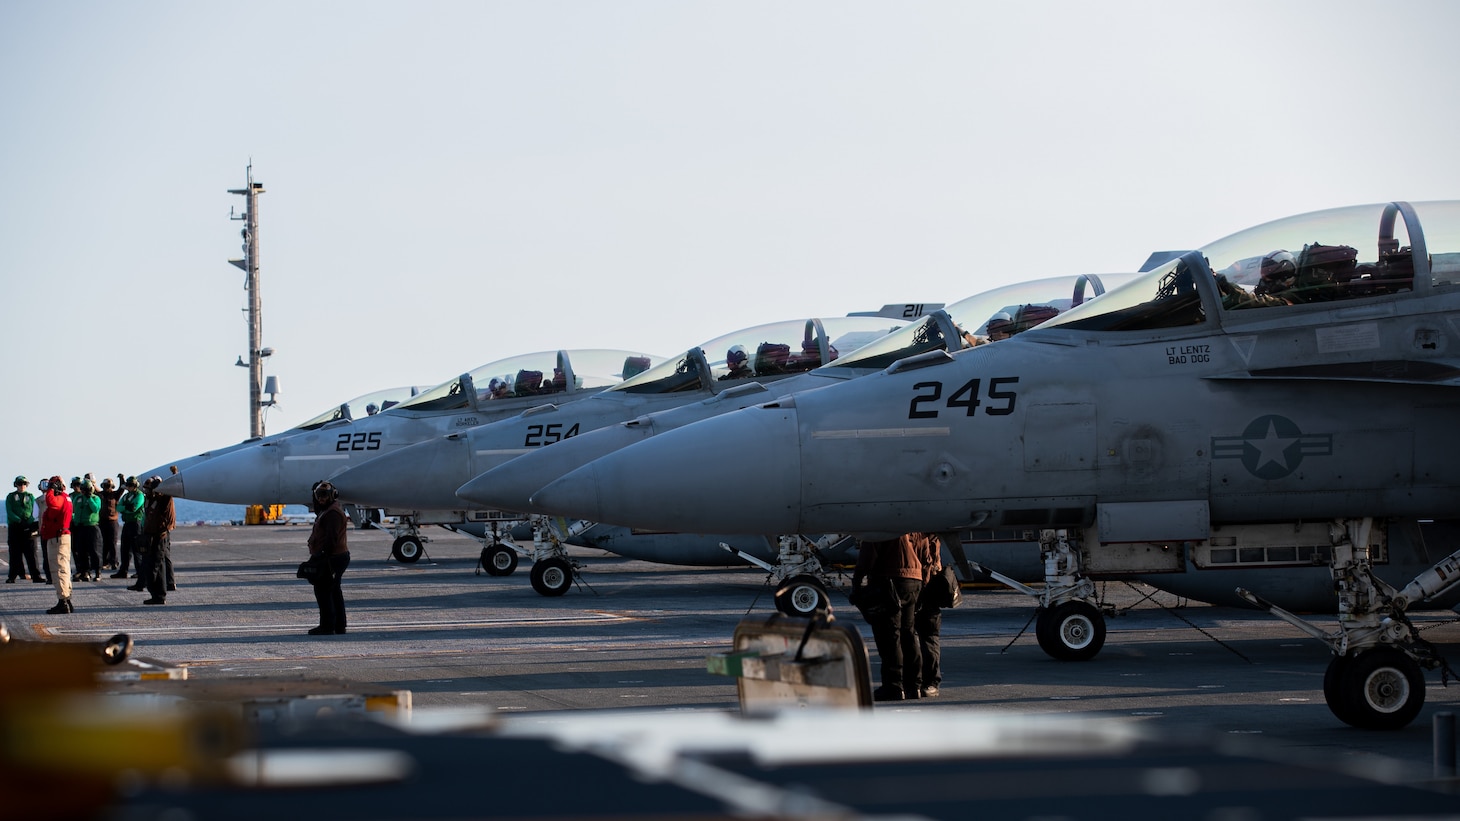 ATLANTIC OCEAN - F/A-18F Super Hornets, attached to the "Gladiators" of Strike Fighter Squadron (VFA) 106, sit on USS Gerald R. Ford’s (CVN 78) flight deck, prior to flight operations, Sept. 16, 2022. Ford is underway in the Atlantic Ocean conducting carrier qualifications and workups for a scheduled deployment this fall. (U.S. Navy photo by Mass Communication Specialist 3rd Class Grant Gorzocoski)